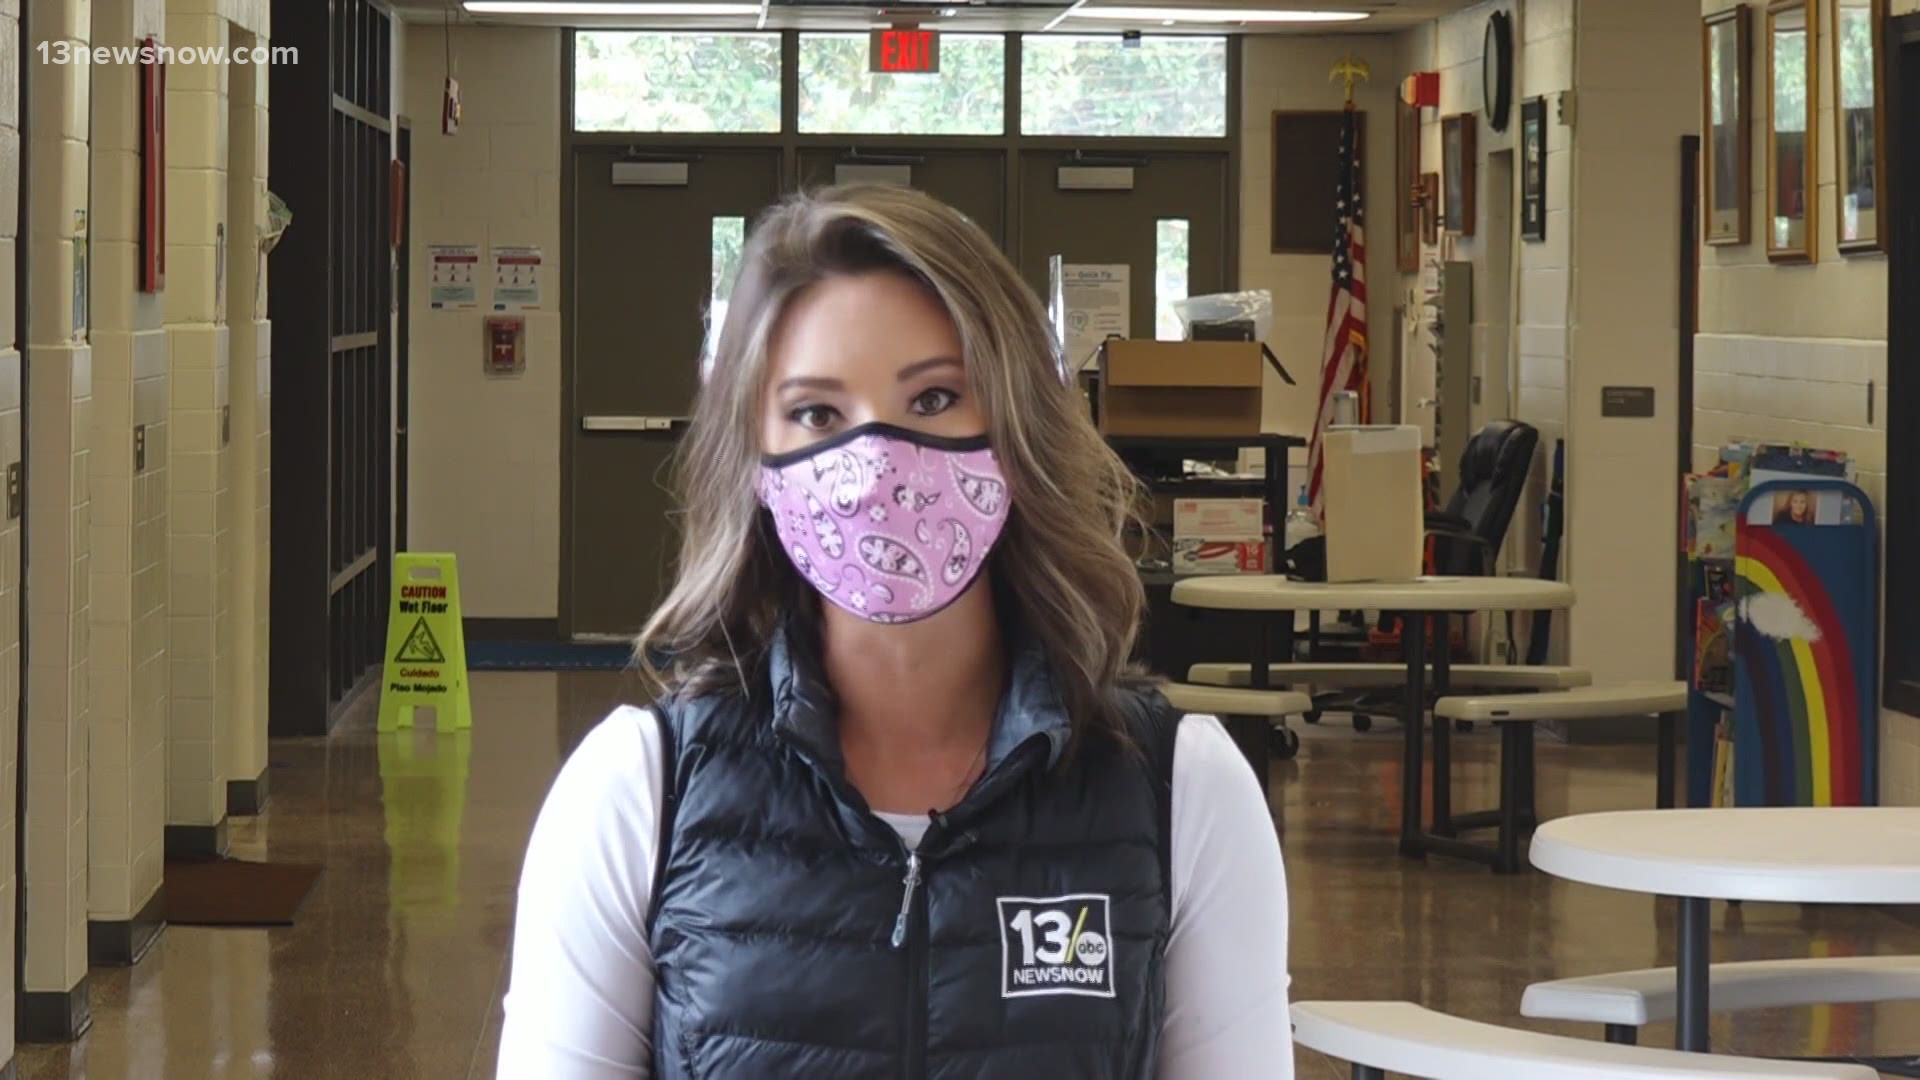 They're adjusting bus practices, putting down distance reminders and sanitizing more. Masks are required, and the staff is looking forward to seeing their students.